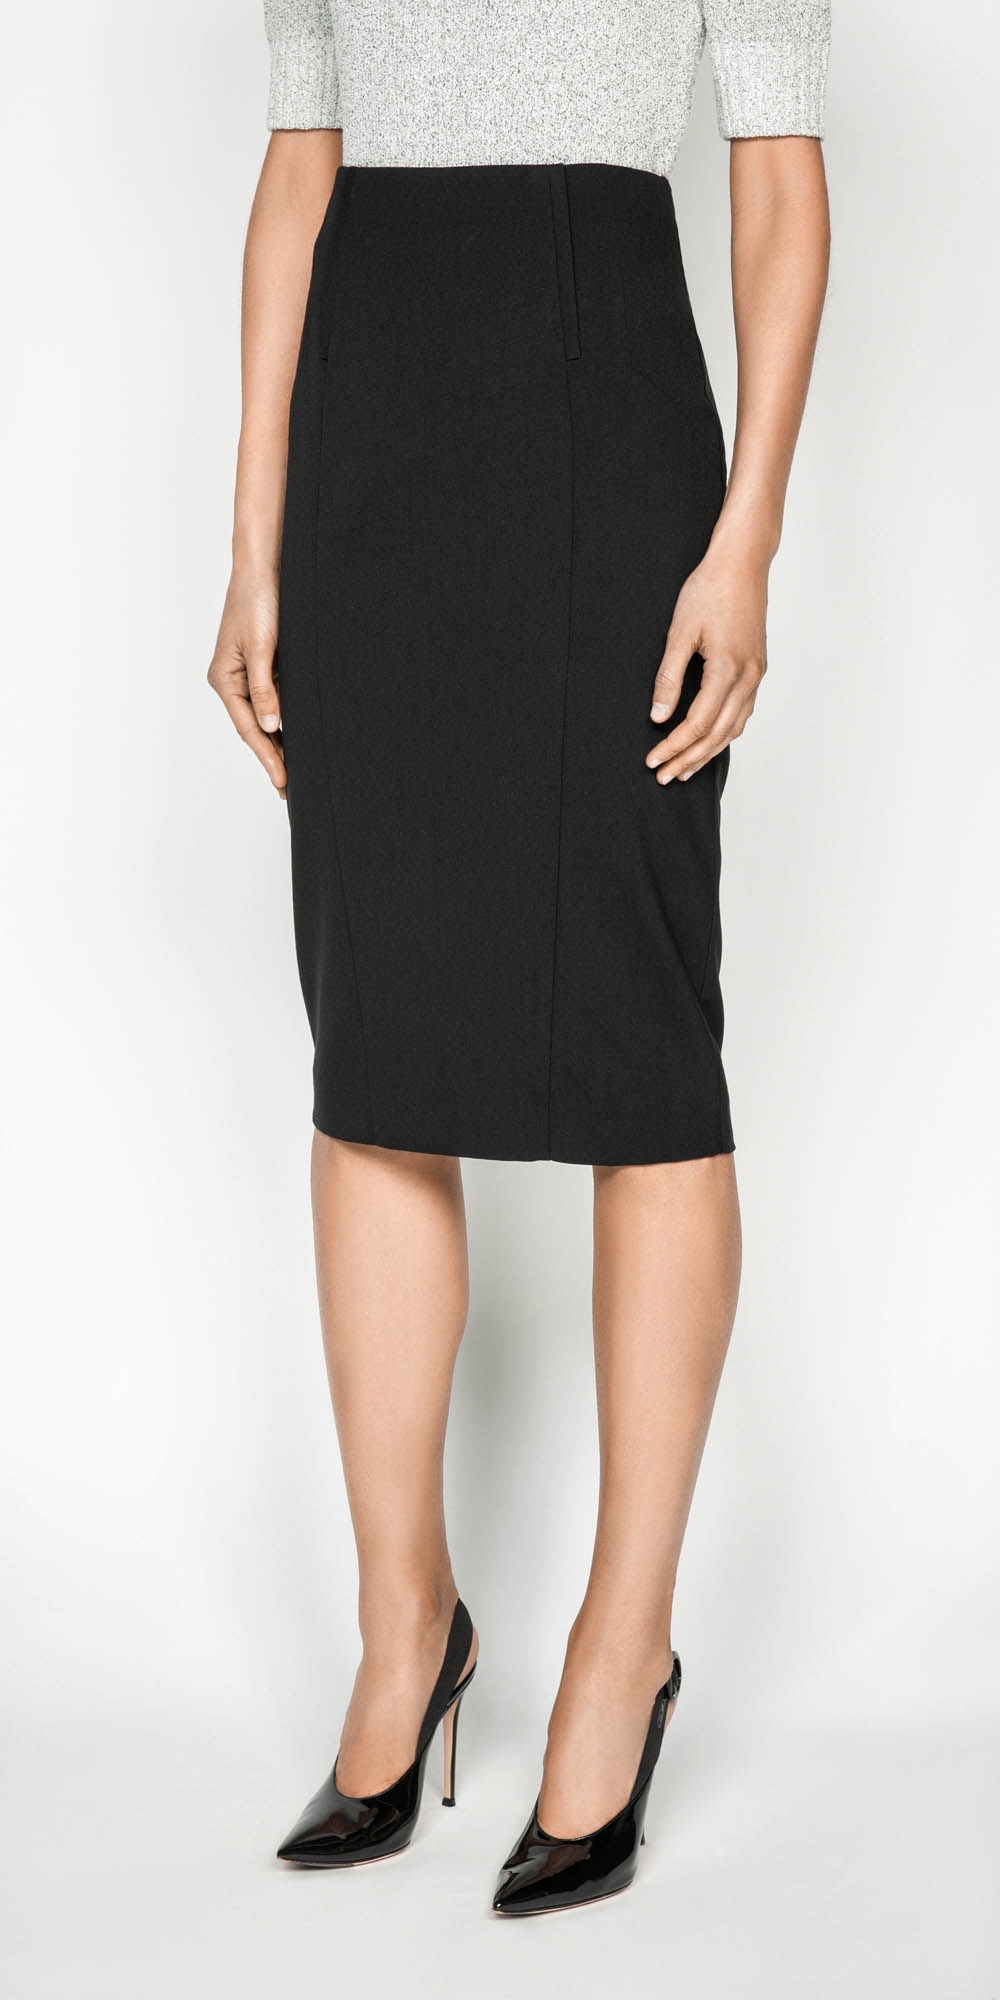 Panelled Pencil Skirt | Buy Skirts Online - Cue